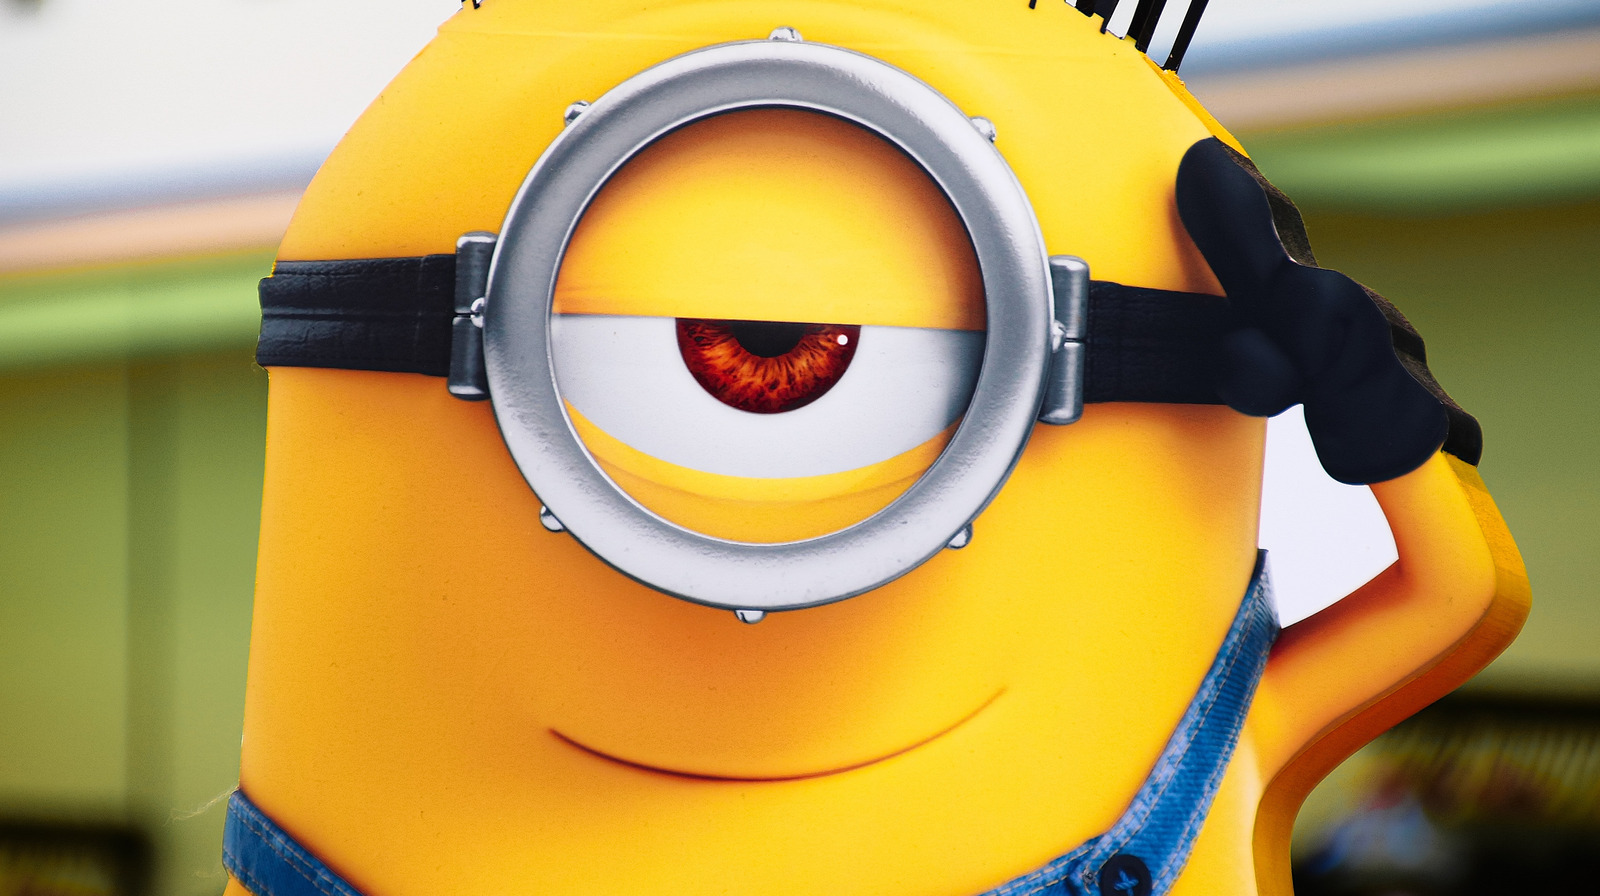 Despicable Me' story 'Minions: The Rise of Gru' will make you smile